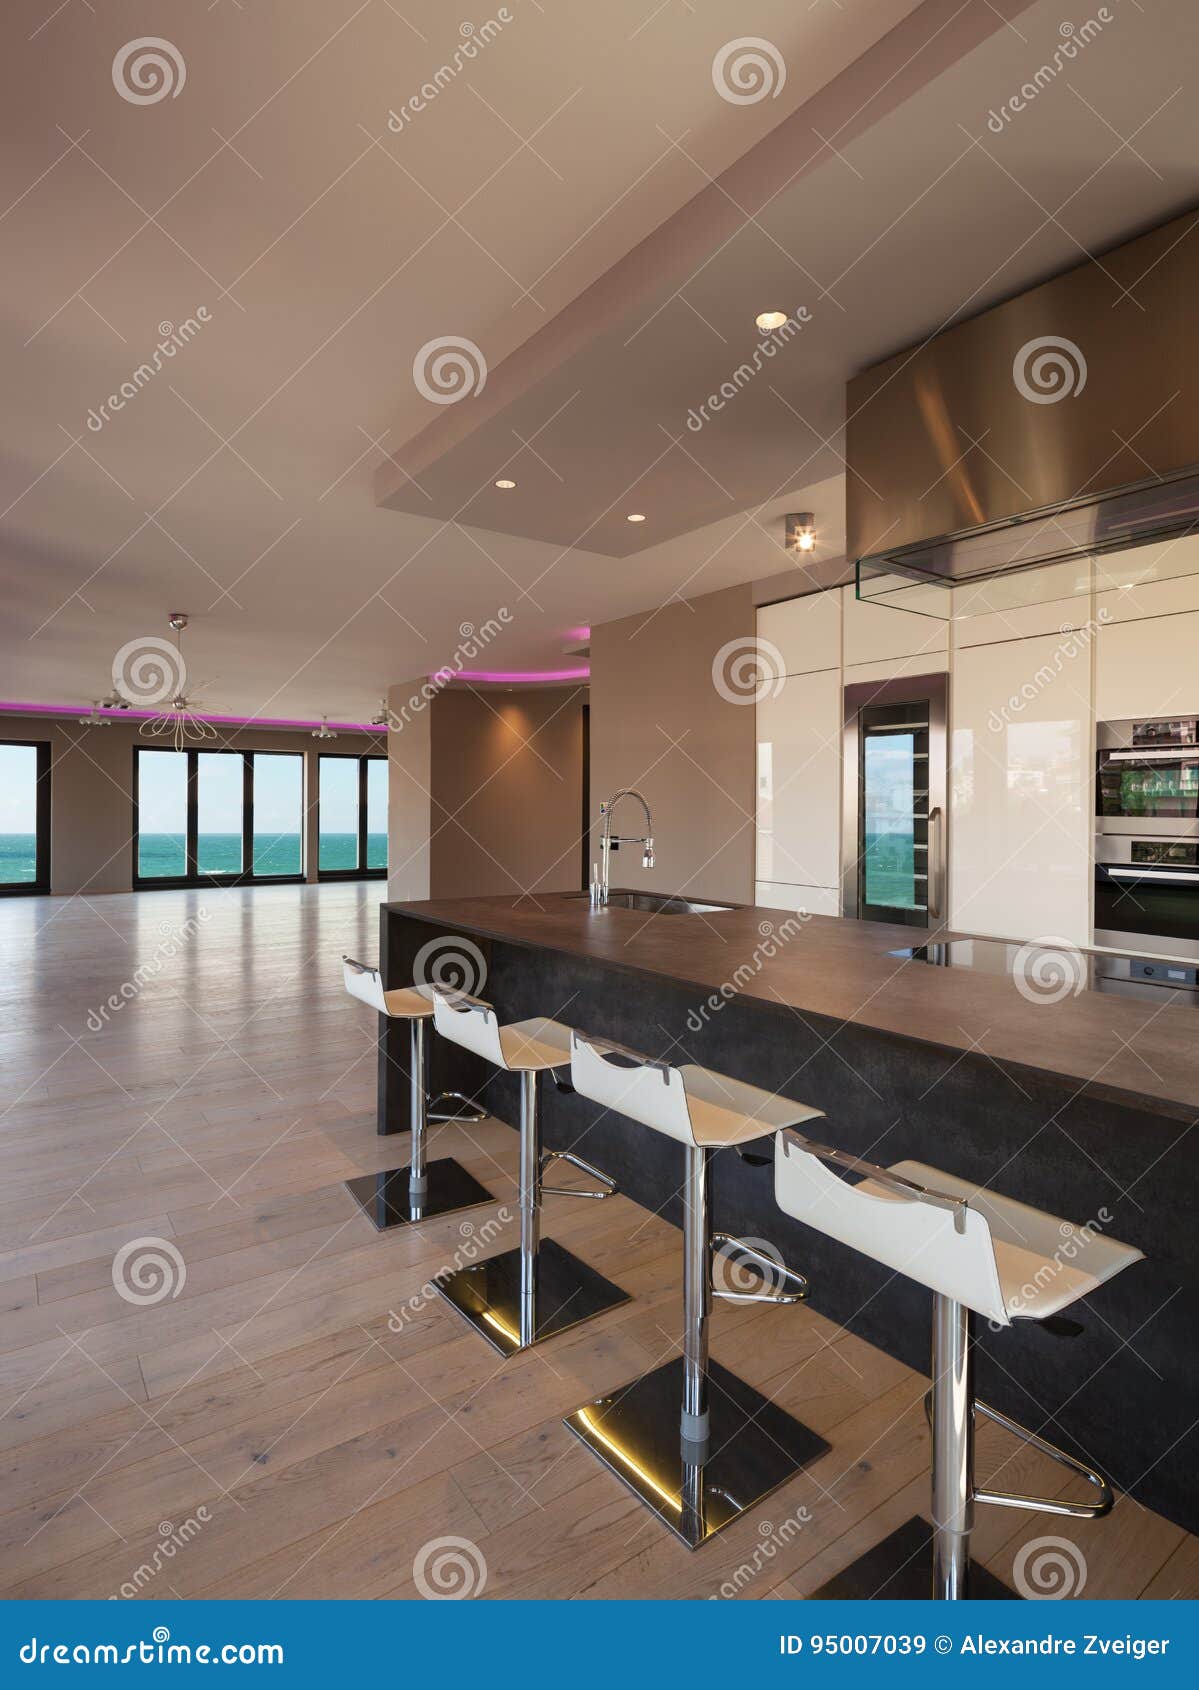 interiors of a modern apartment, kitchen with sea view